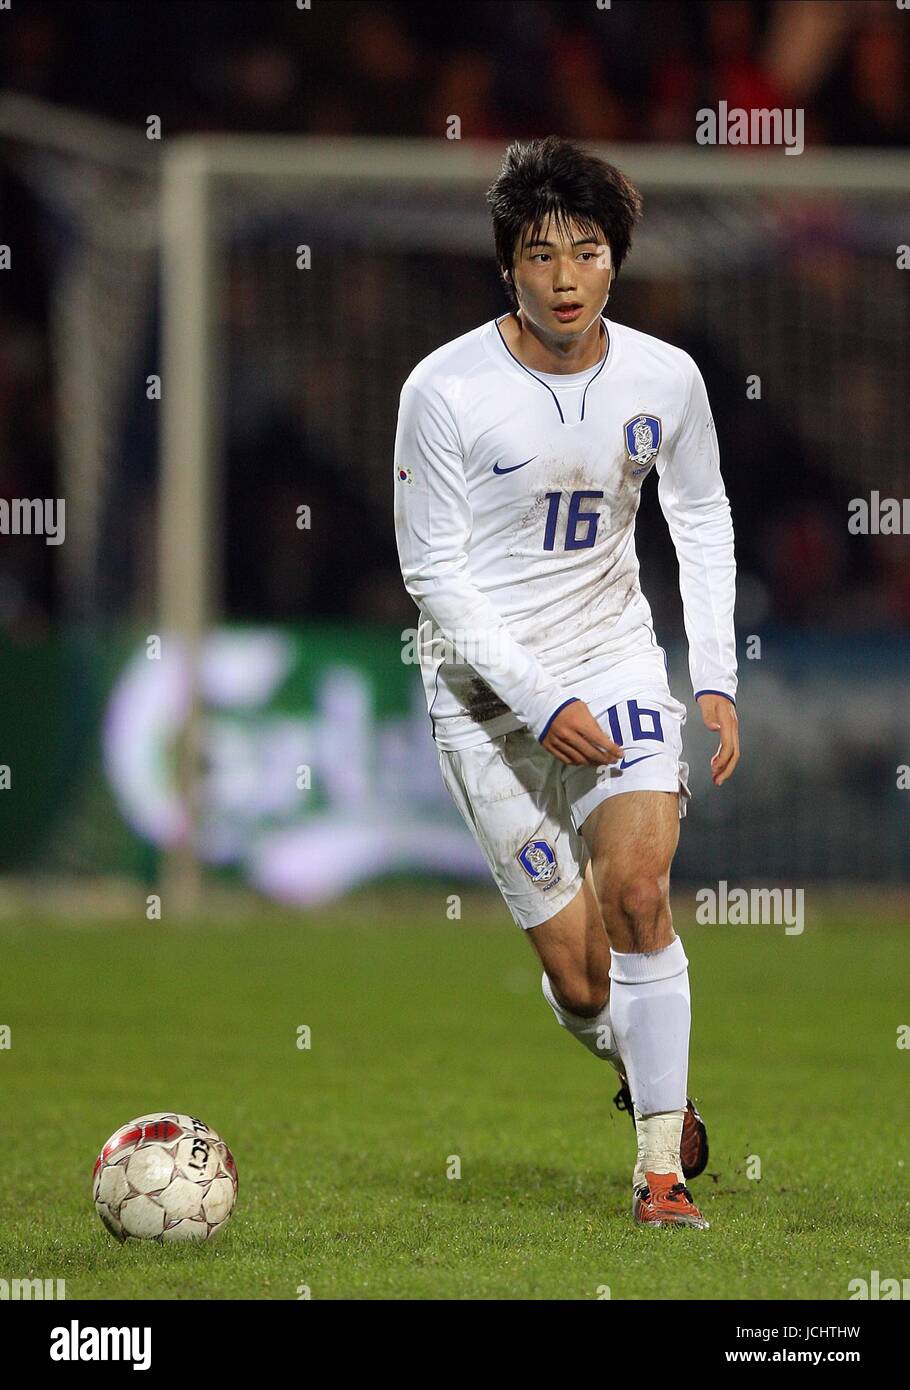 KI SUNG-YUENG SOUTH KOREA DENMARK V SOUTH KOREA BLUE WATER STADIUM,ESJBERG,DENMARK 14 November 2009 GAA3551     WARNING! This Photograph May Only Be Used For Newspaper And/Or Magazine Editorial Purposes. May Not Be Used For, Internet/Online Usage Nor For Publications Involving 1 player, 1 Club Or 1 Competition, Without Written Authorisation From Football DataCo Ltd. For Any Queries, Please Contact Football DataCo Ltd on +44 (0) 207 864 9121 Stock Photo